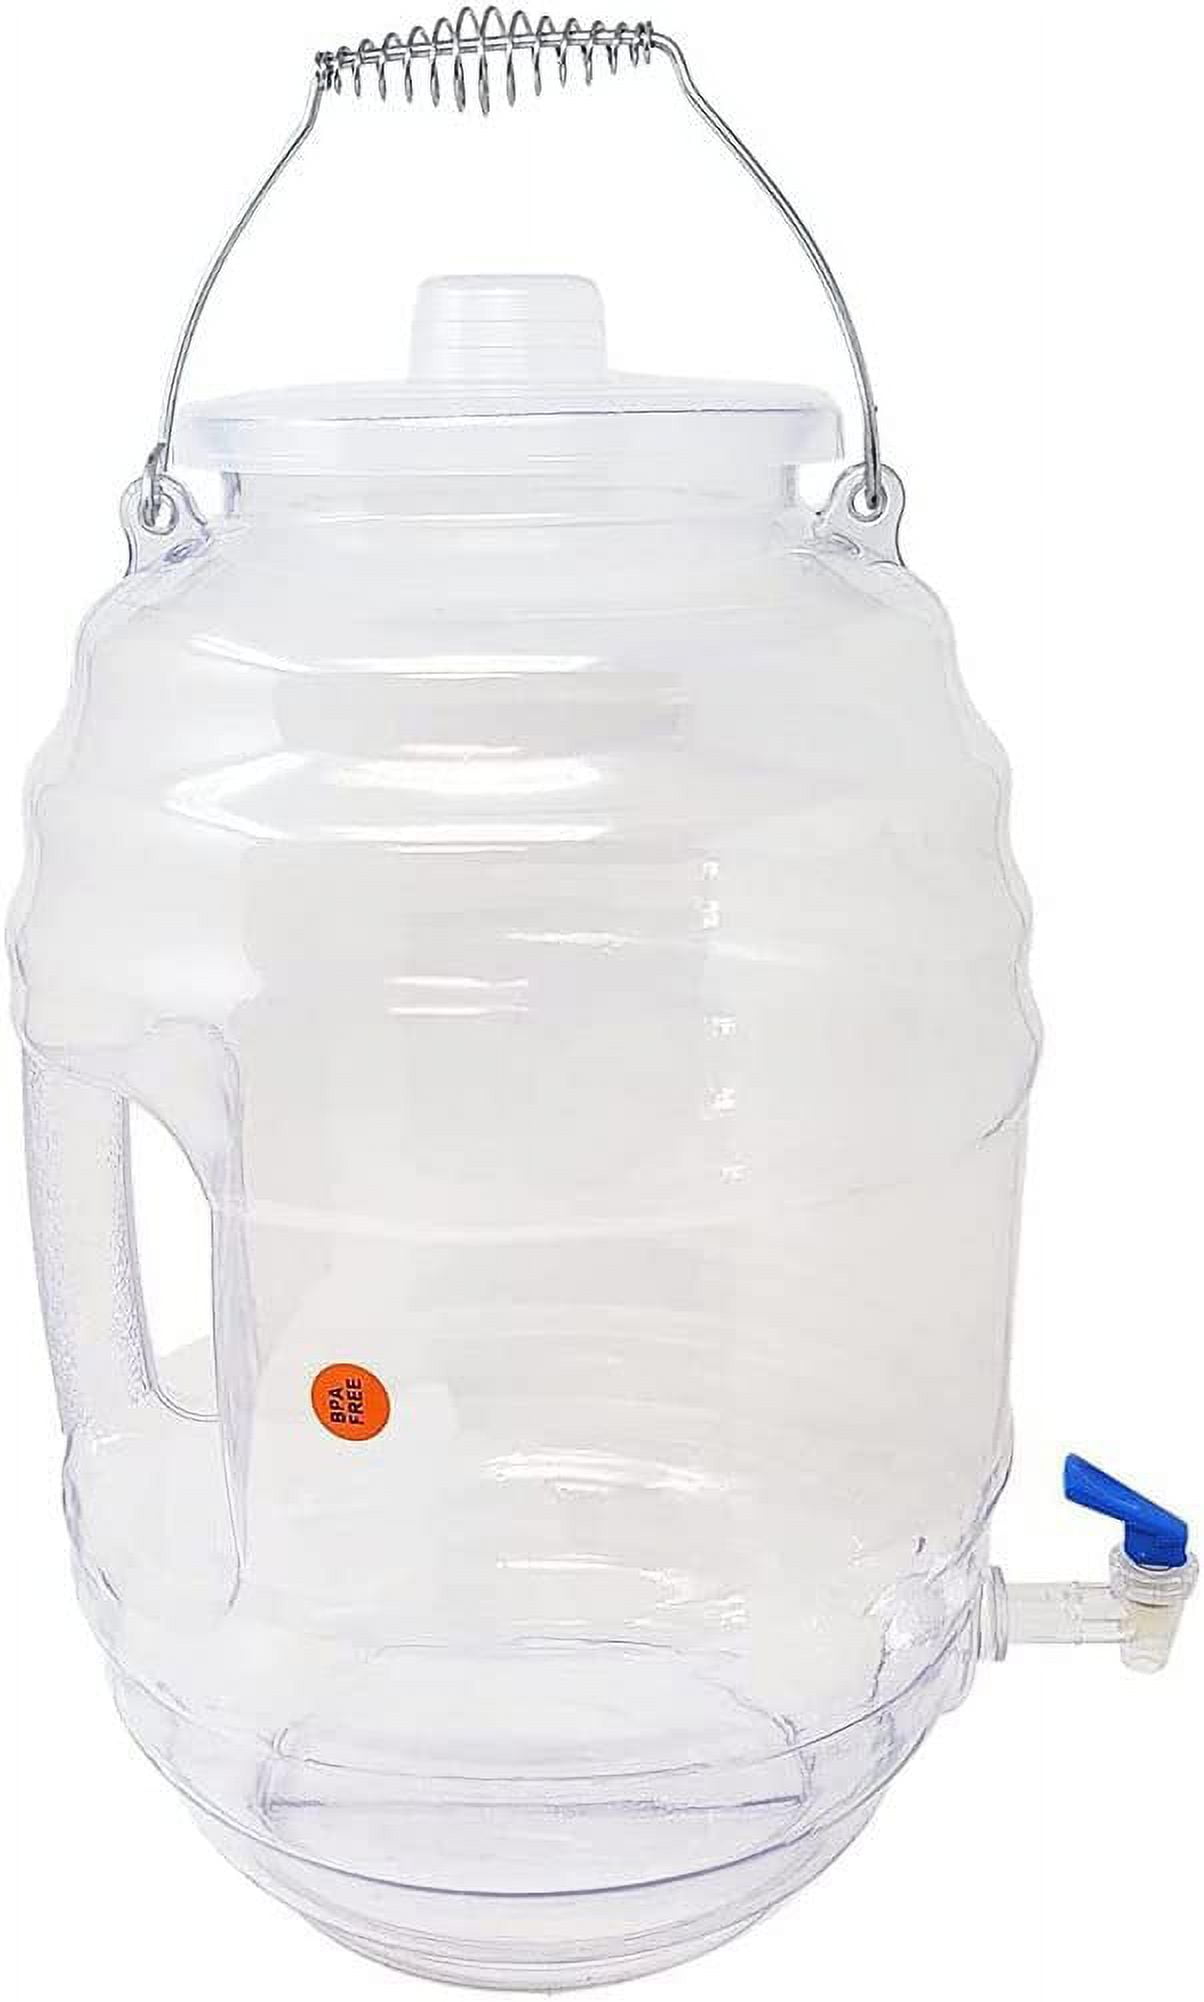 Mexican Clear Vitrolero with Lid, 5 Gallon Jug for Aguas Frescas, Juice,  Sun Tea, or other Beverages with Lid, 20 L Clear, BPA-Free Food-Grade  Plastic